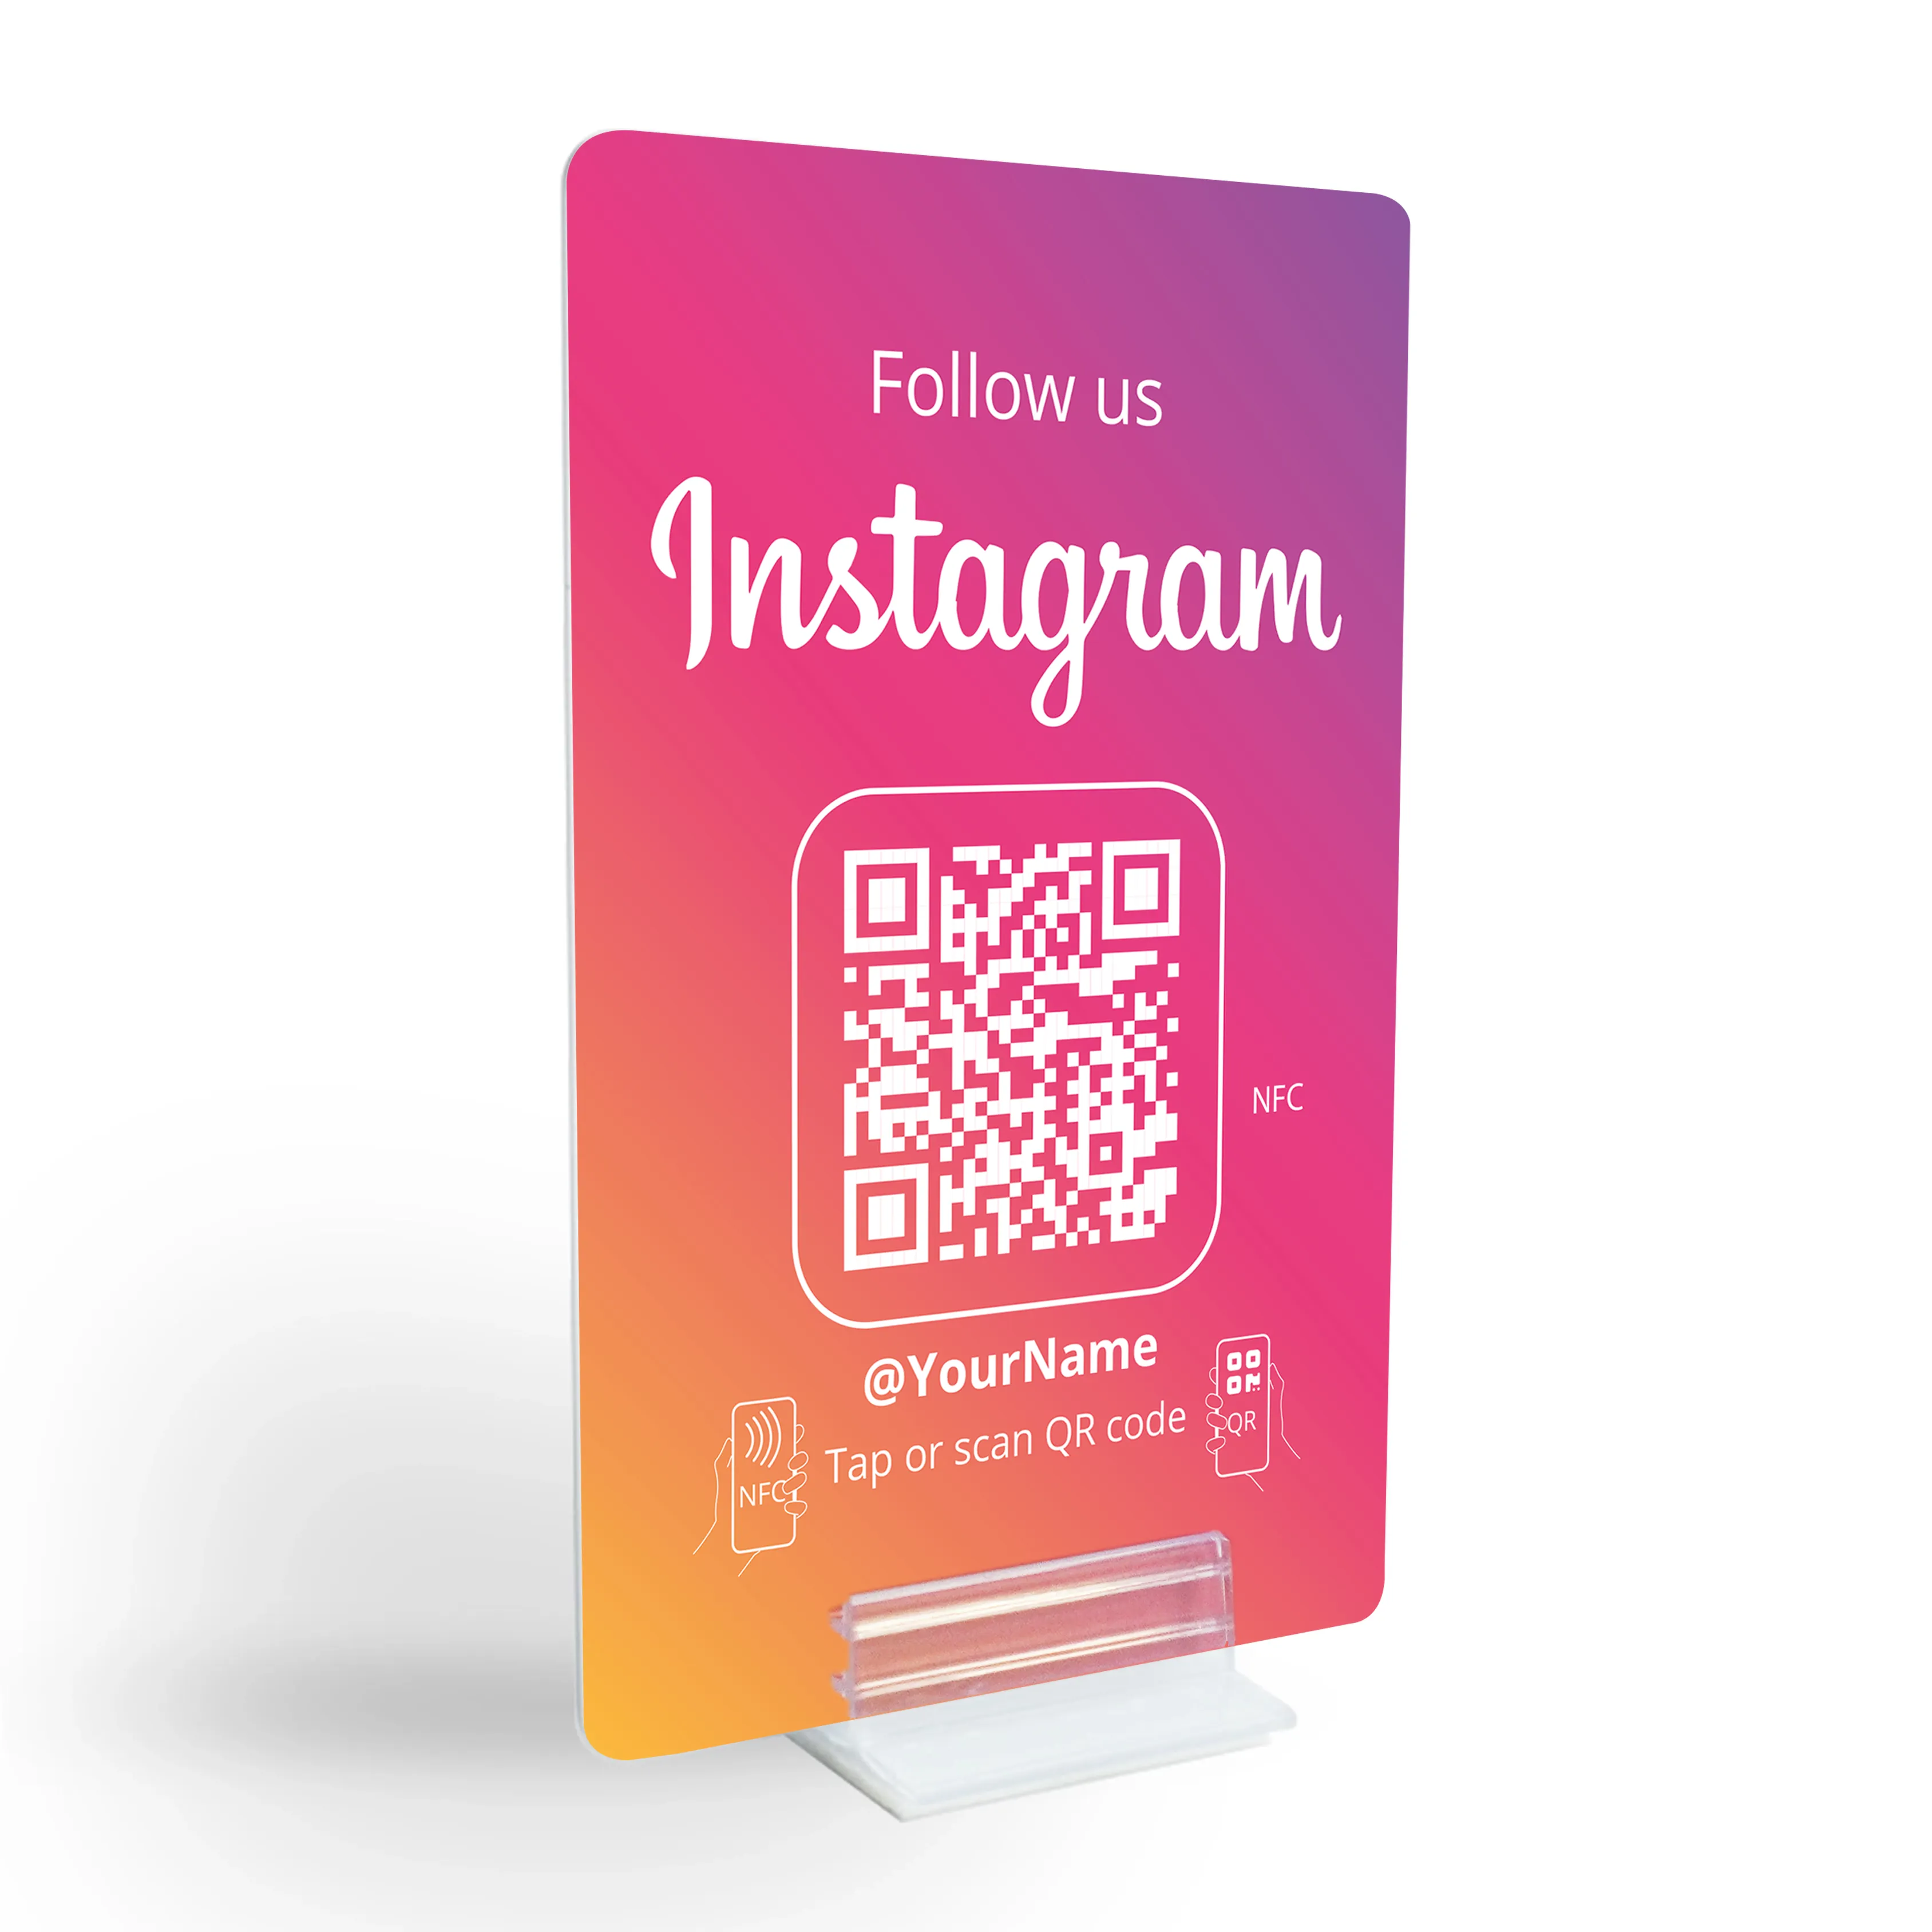 Instagram Booster Card - NFC/QR code display for instant follower growth